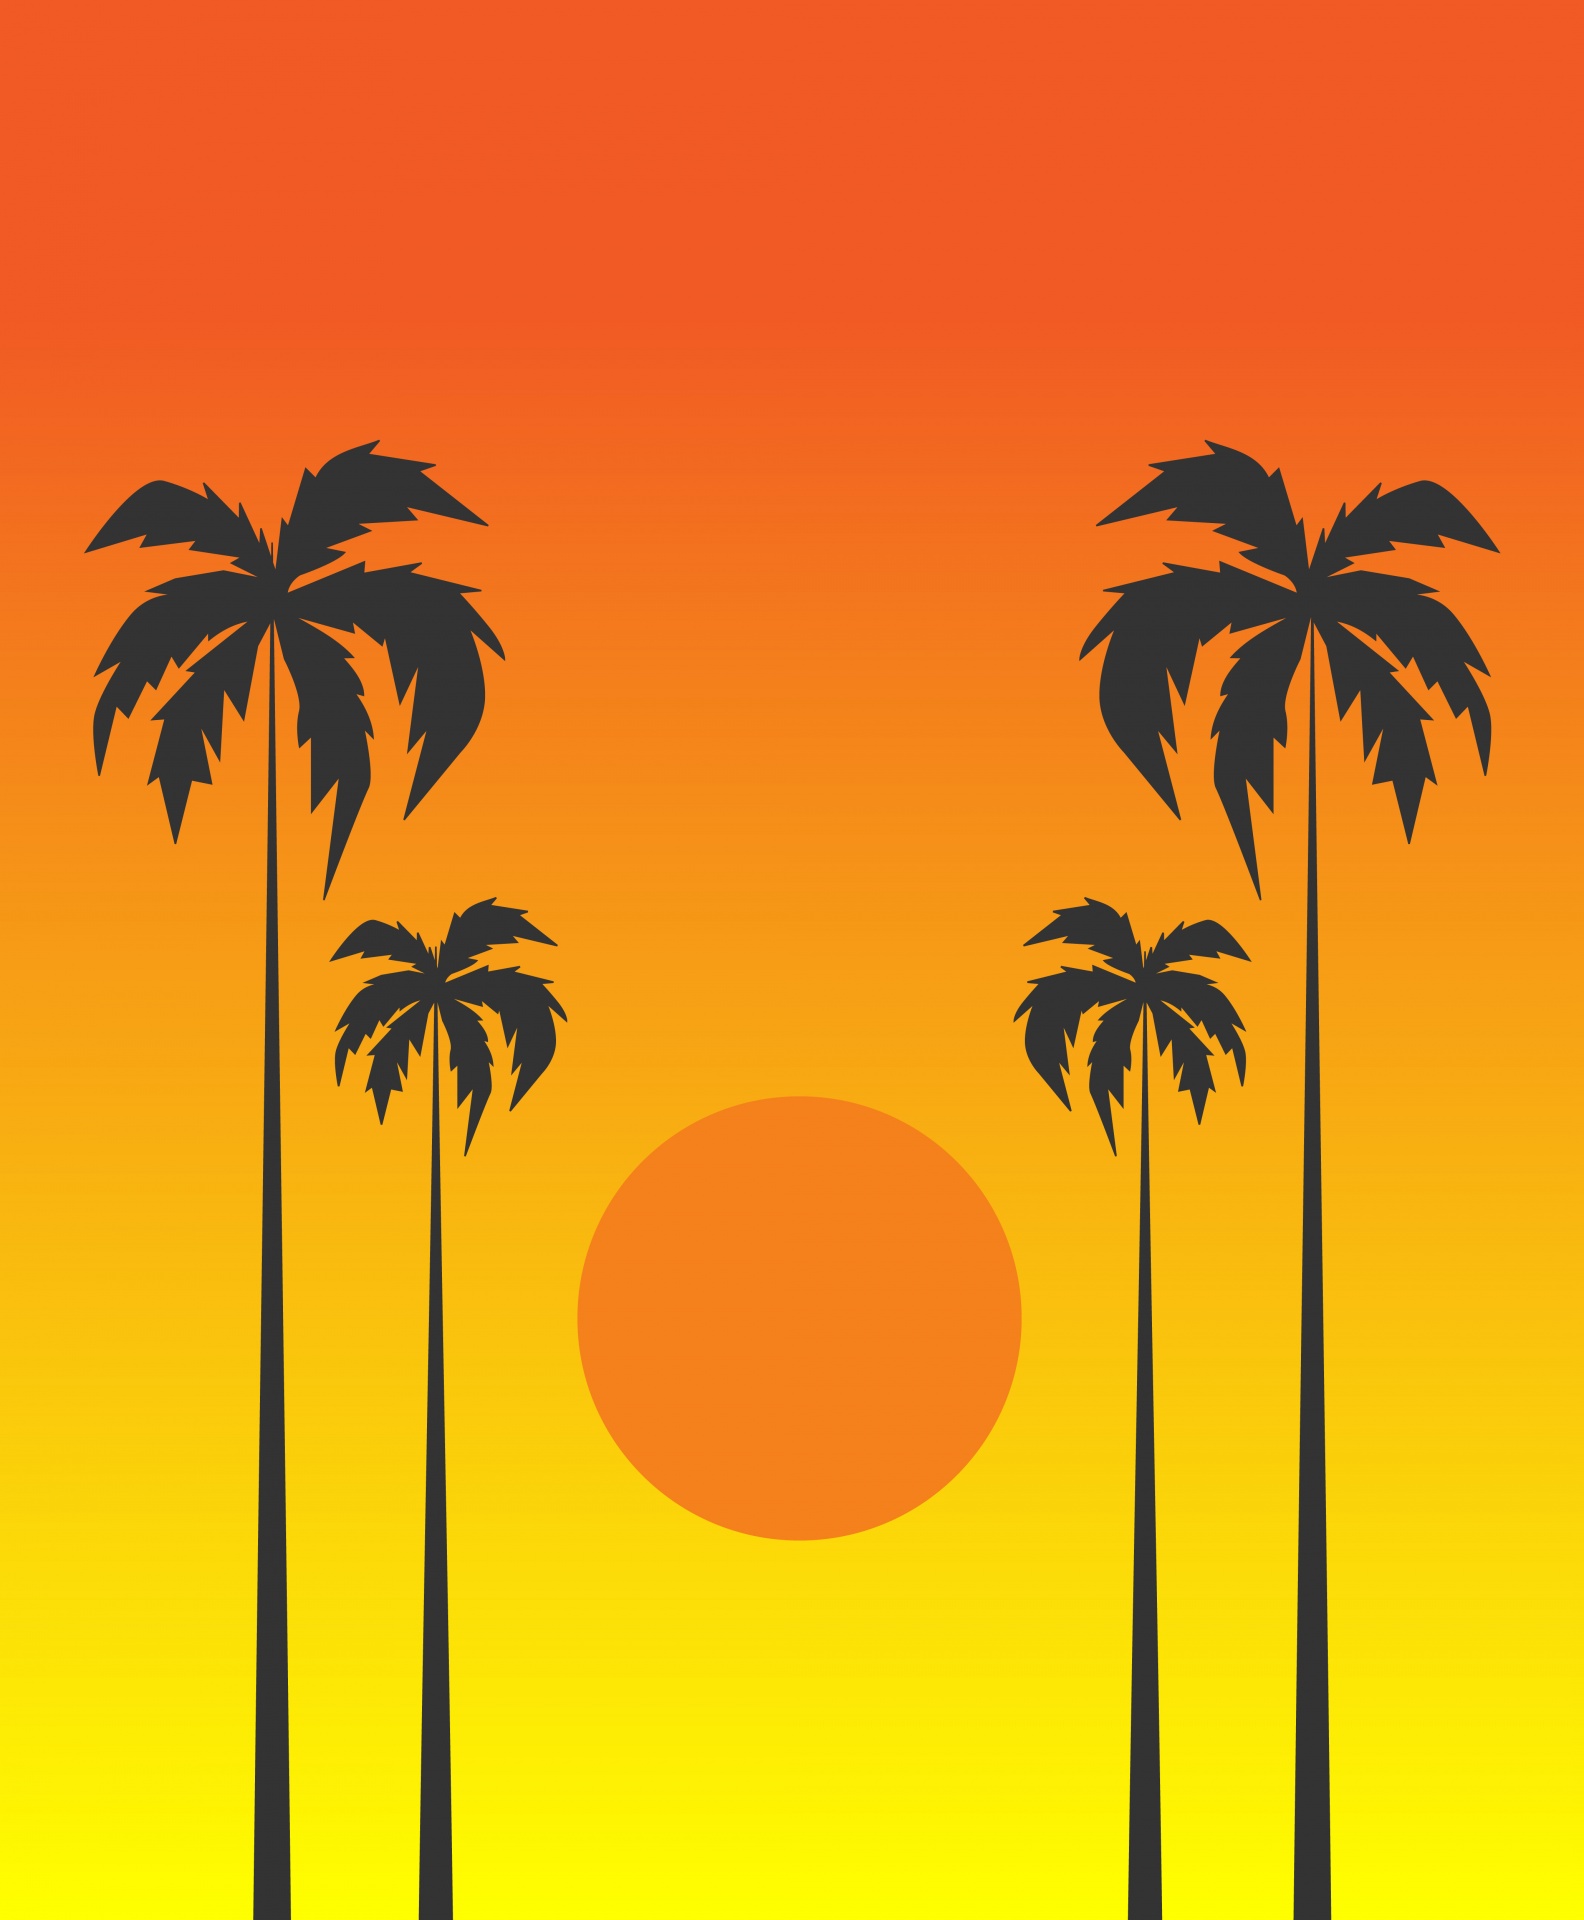 Silhouette of palm trees against tropical orange sky sunset